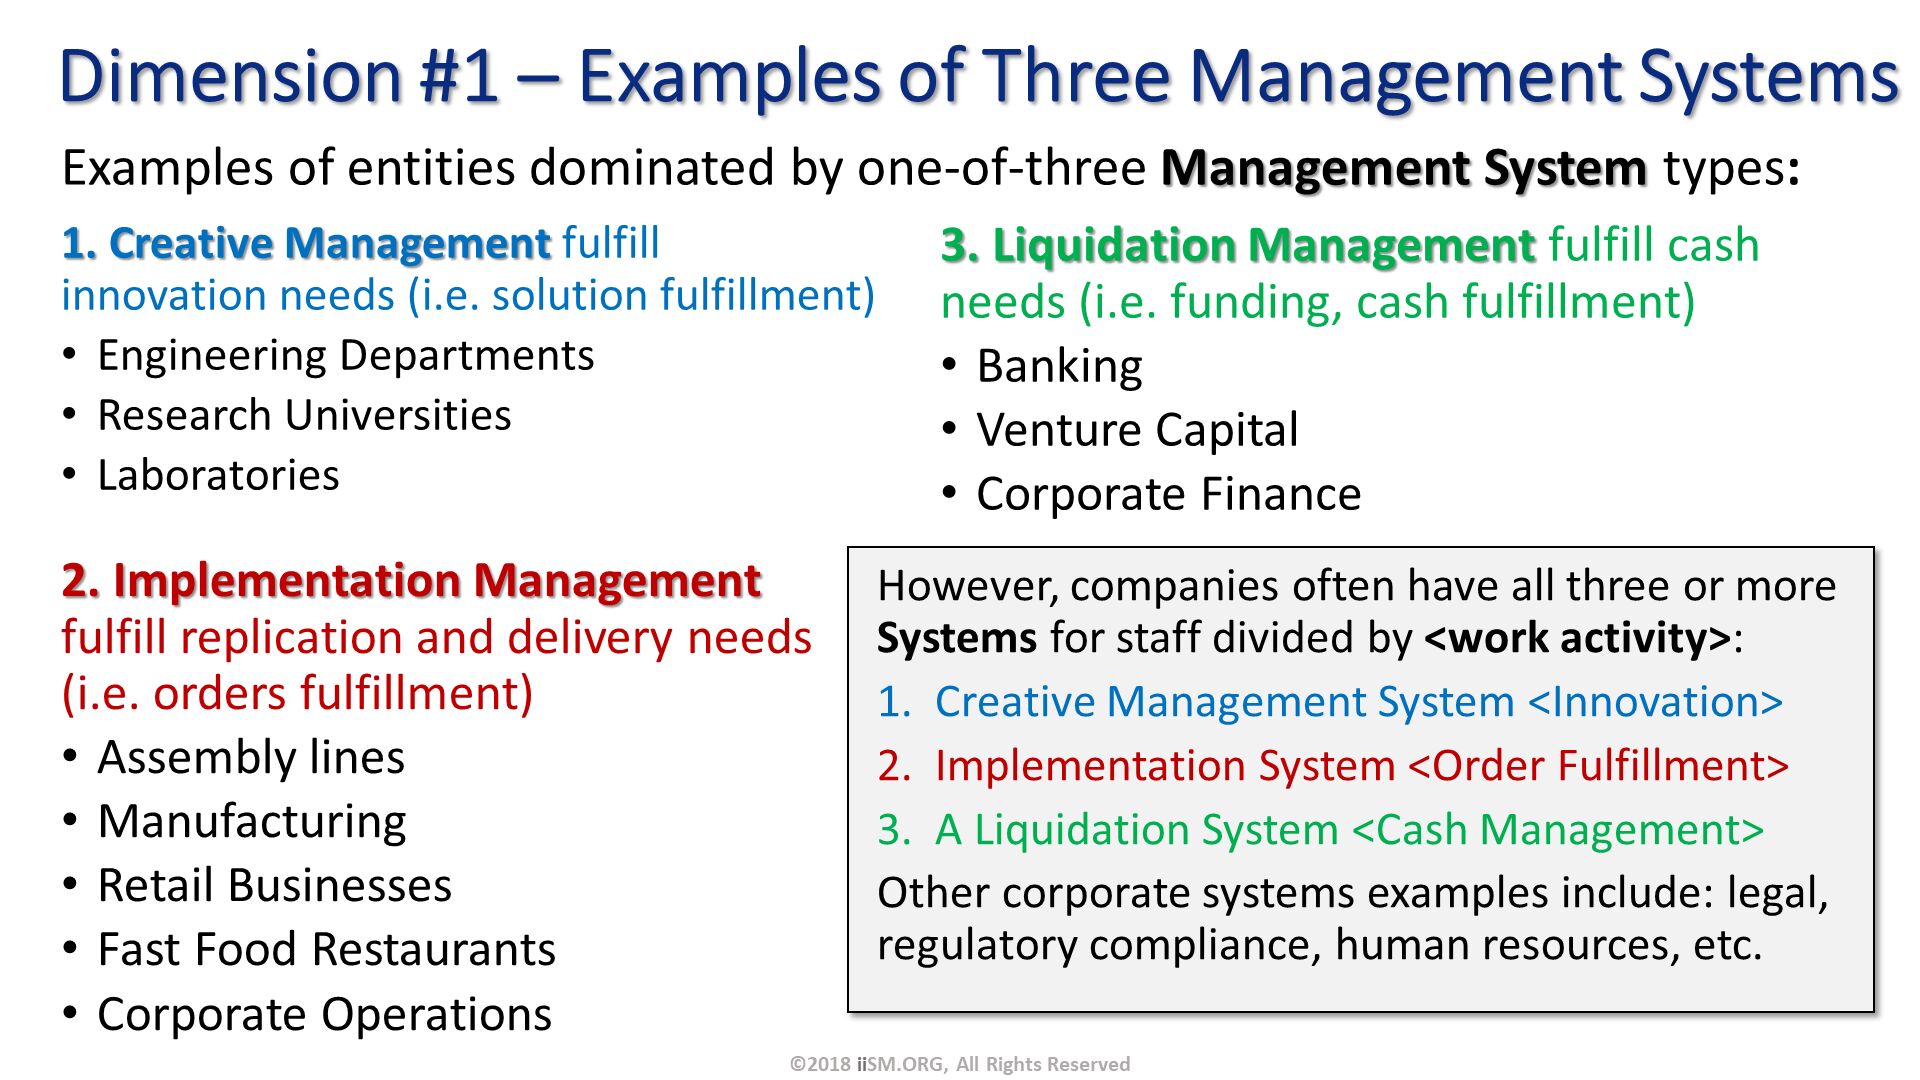 Examples of entities dominated by one-of-three Management System types:. Dimension #1 – Examples of Three Management Systems. ©2018 iiSM.ORG, All Rights Reserved. 1. Creative Management fulfill innovation needs (i.e. solution fulfillment)
Engineering Departments
Research Universities
Laboratories

. 2. Implementation Management fulfill replication and delivery needs (i.e. orders fulfillment) 
Assembly lines
Manufacturing
Retail Businesses
Fast Food Restaurants
Corporate Operations
. 3. Liquidation Management fulfill cash needs (i.e. funding, cash fulfillment)
Banking
Venture Capital
Corporate Finance
. However, companies often have all three or more Systems for staff divided by <work activity>:
Creative Management System <Innovation> 
Implementation System <Order Fulfillment> 
A Liquidation System <Cash Management>
Other corporate systems examples include: legal, regulatory compliance, human resources, etc.
. 